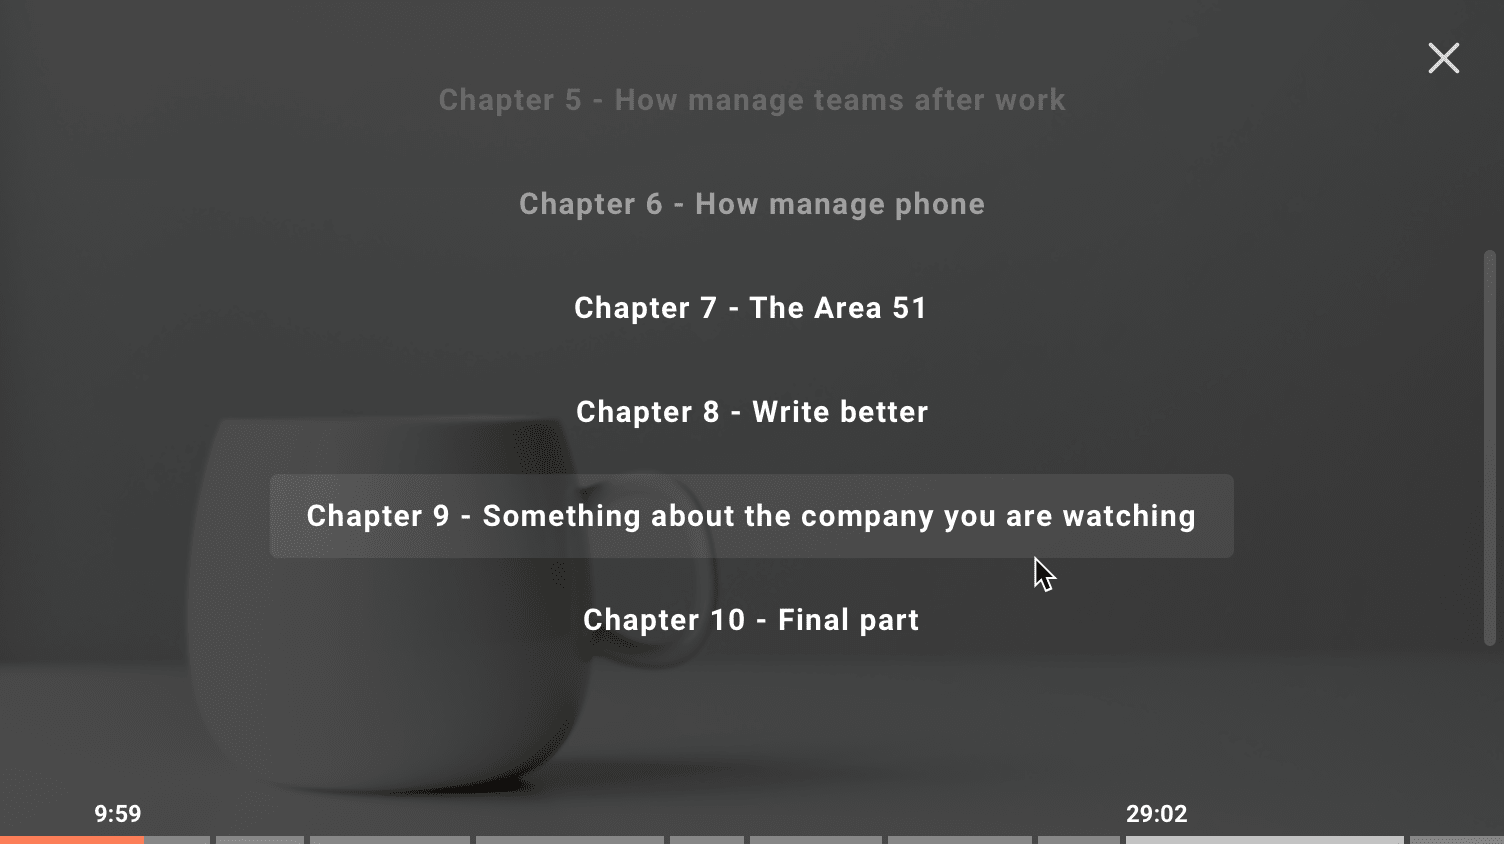 Adding chapters to your videos